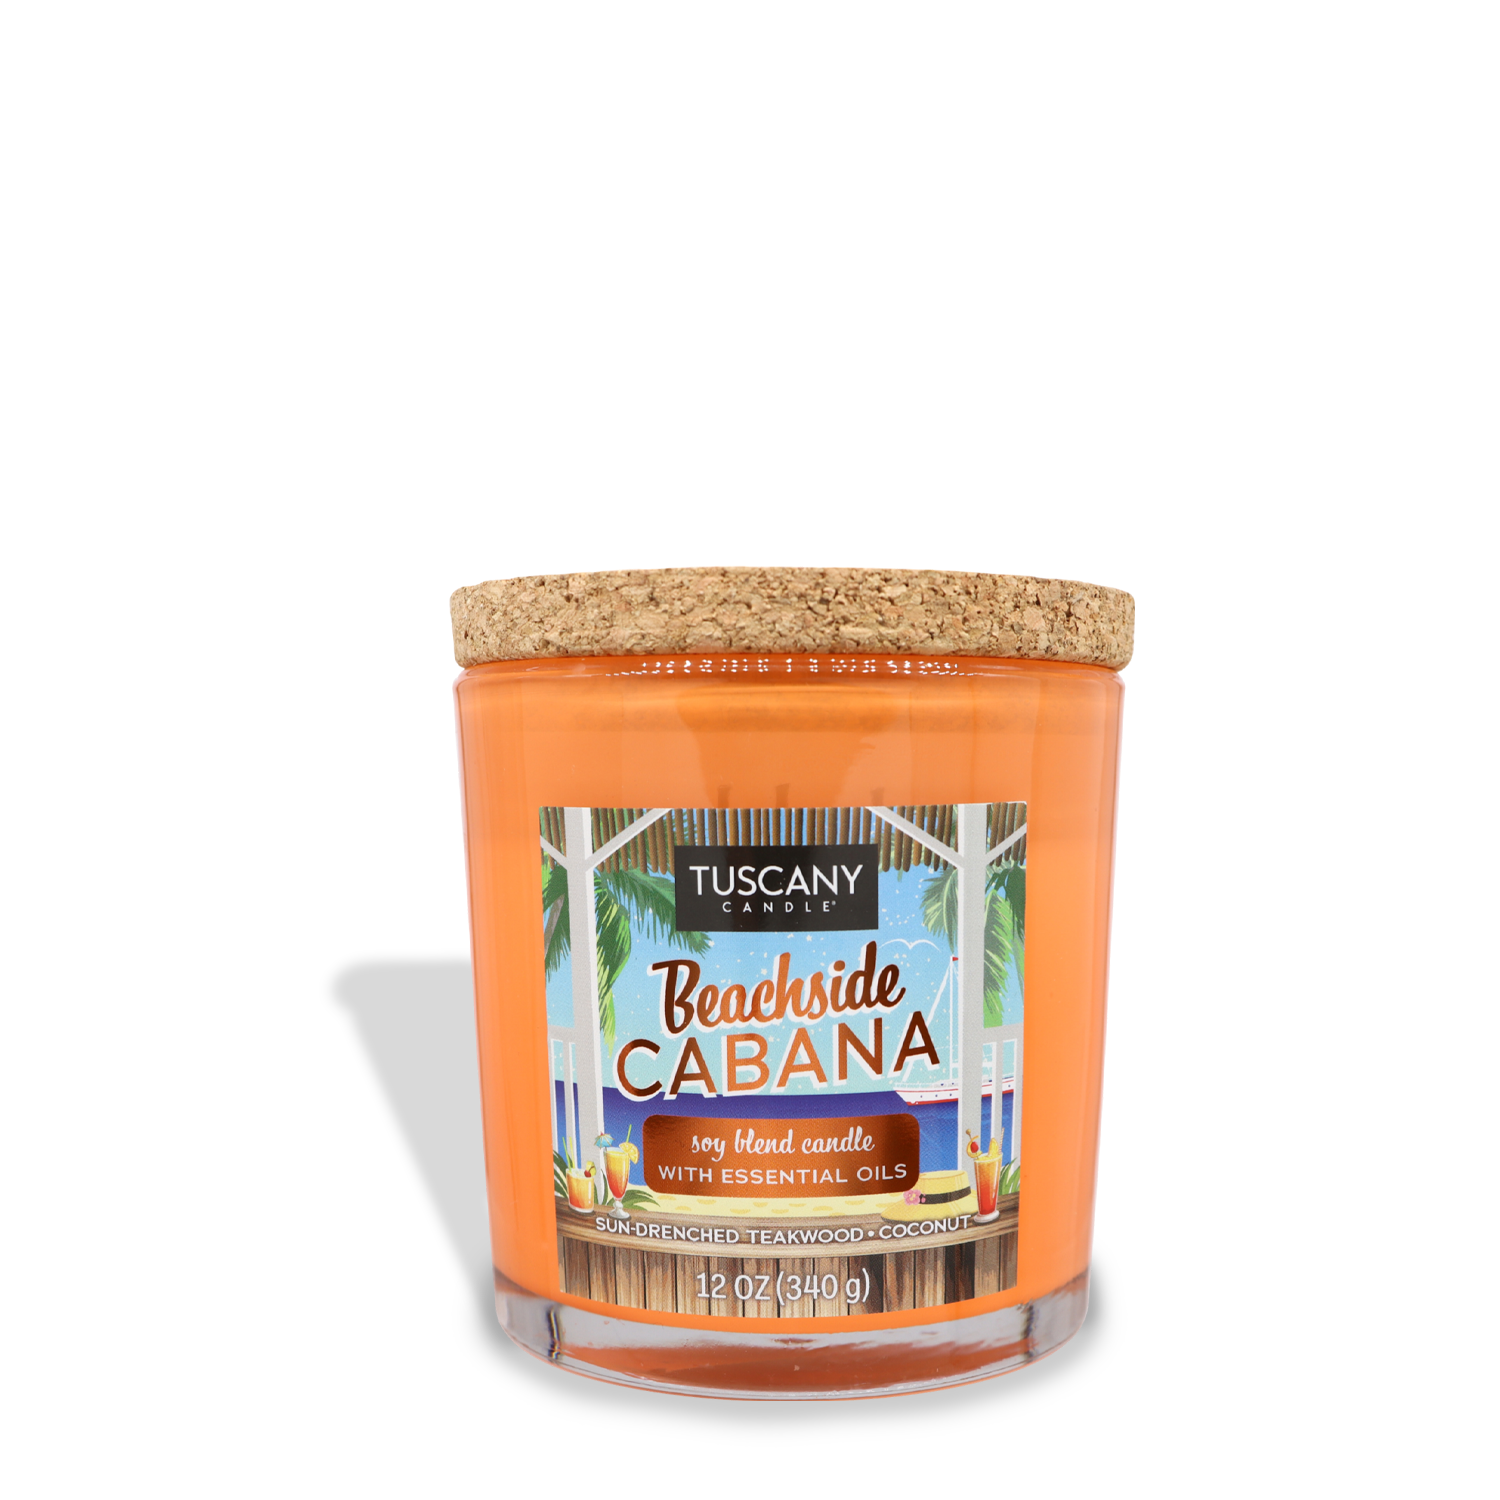 A 12 oz Tuscany Candle® SEASONAL labeled "Beachside Cabana (12 oz) – Sunset Beach Bar Collection" with essential oils, featuring a cork lid and showcasing a summer beach scene on the label, envelops your space with the soothing scents of sea salt and warm coconut.